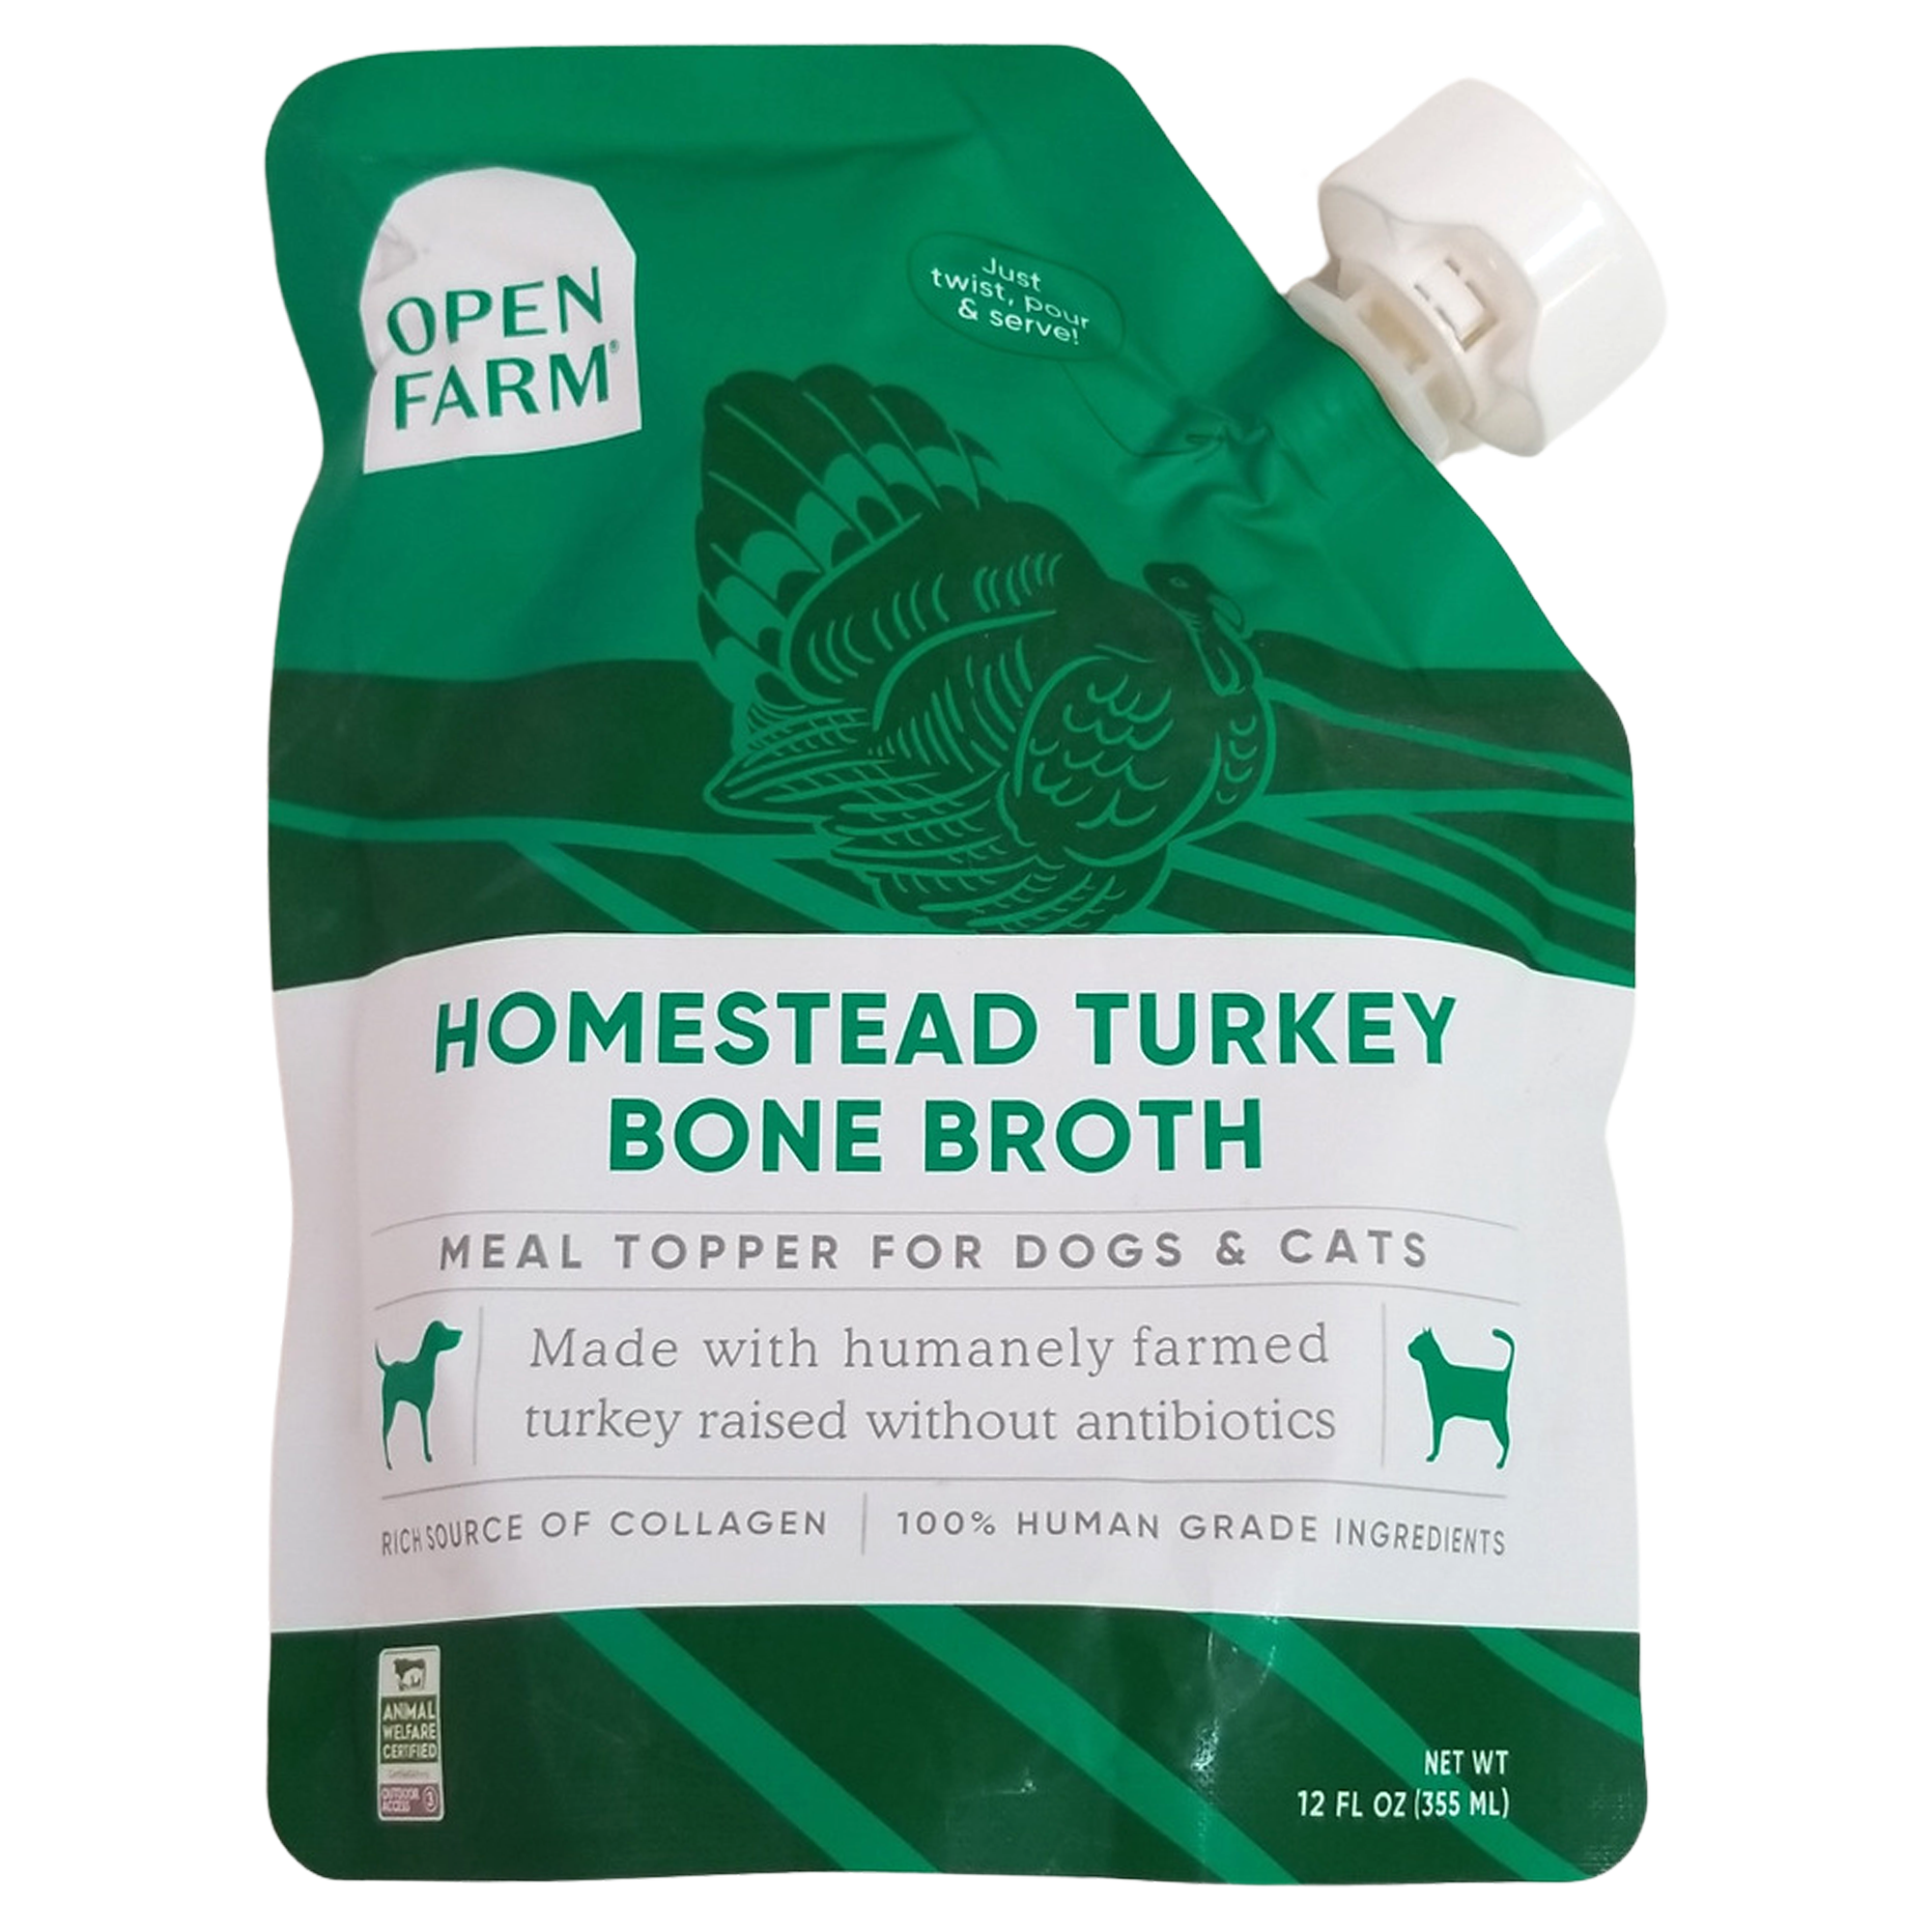 Open Farm Meal Topper for Dogs & Cats, Homestead Turkey Bone Broth